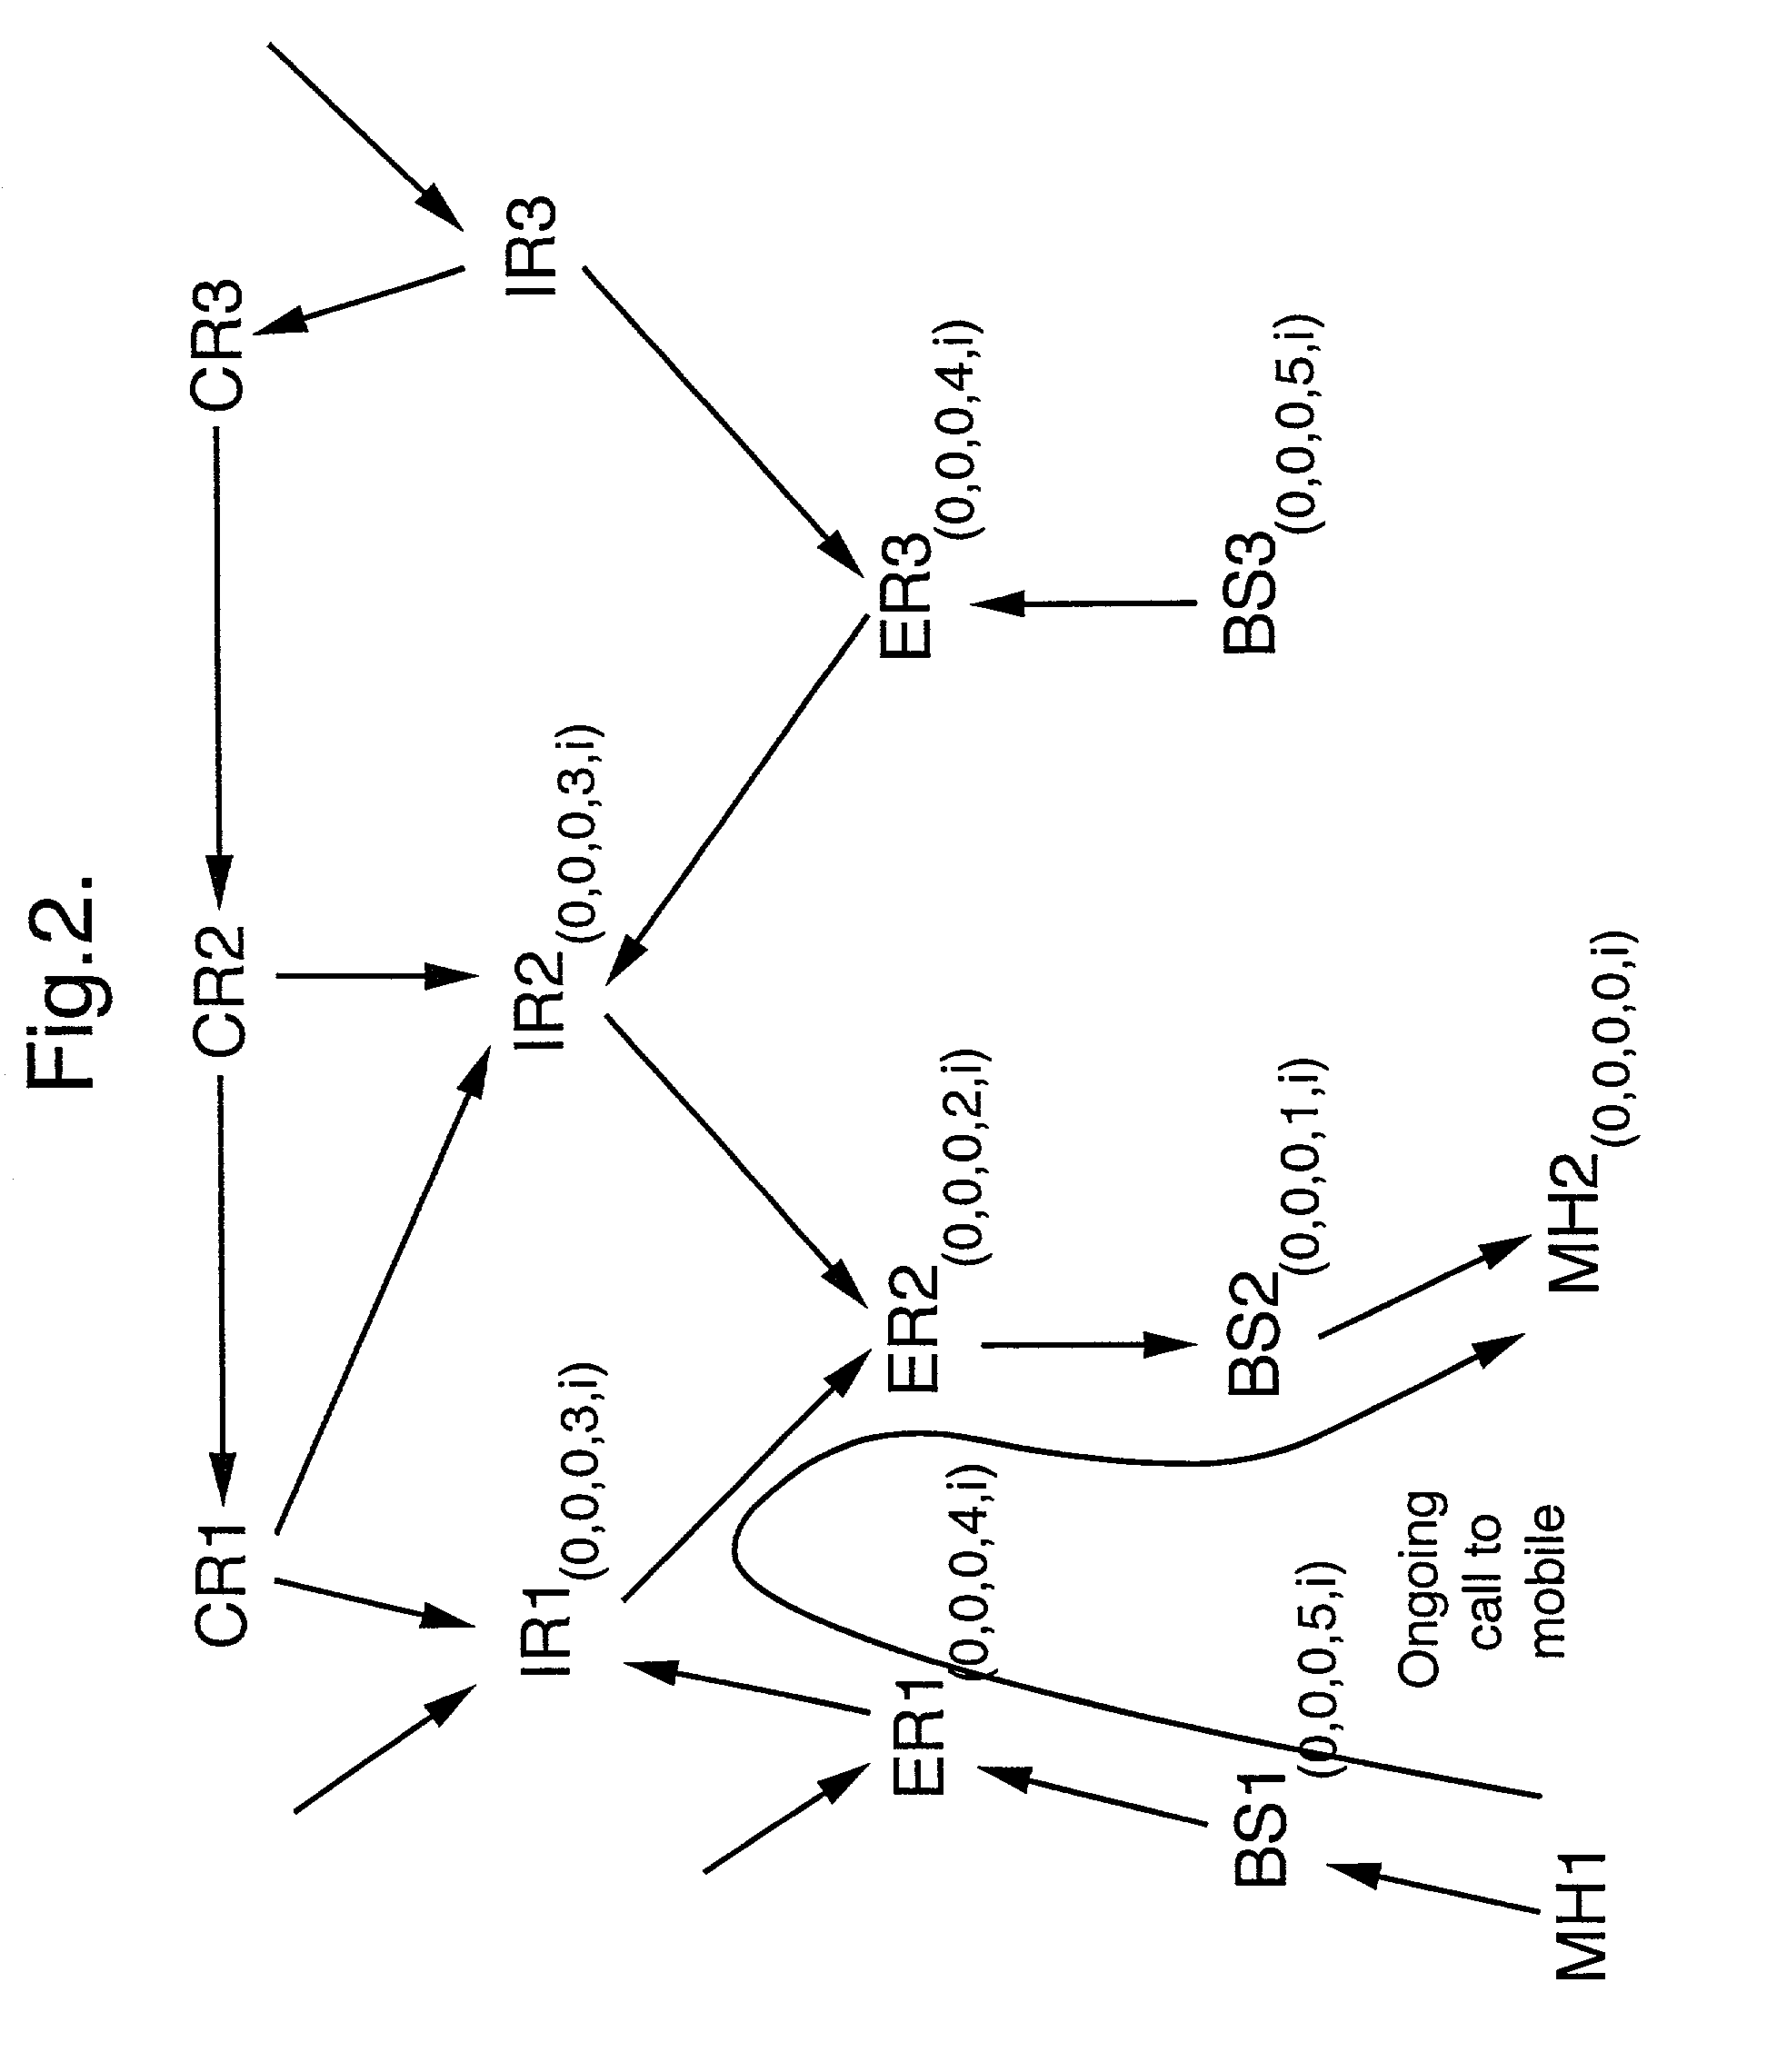 Routing in a packet switching network with mobile terminals